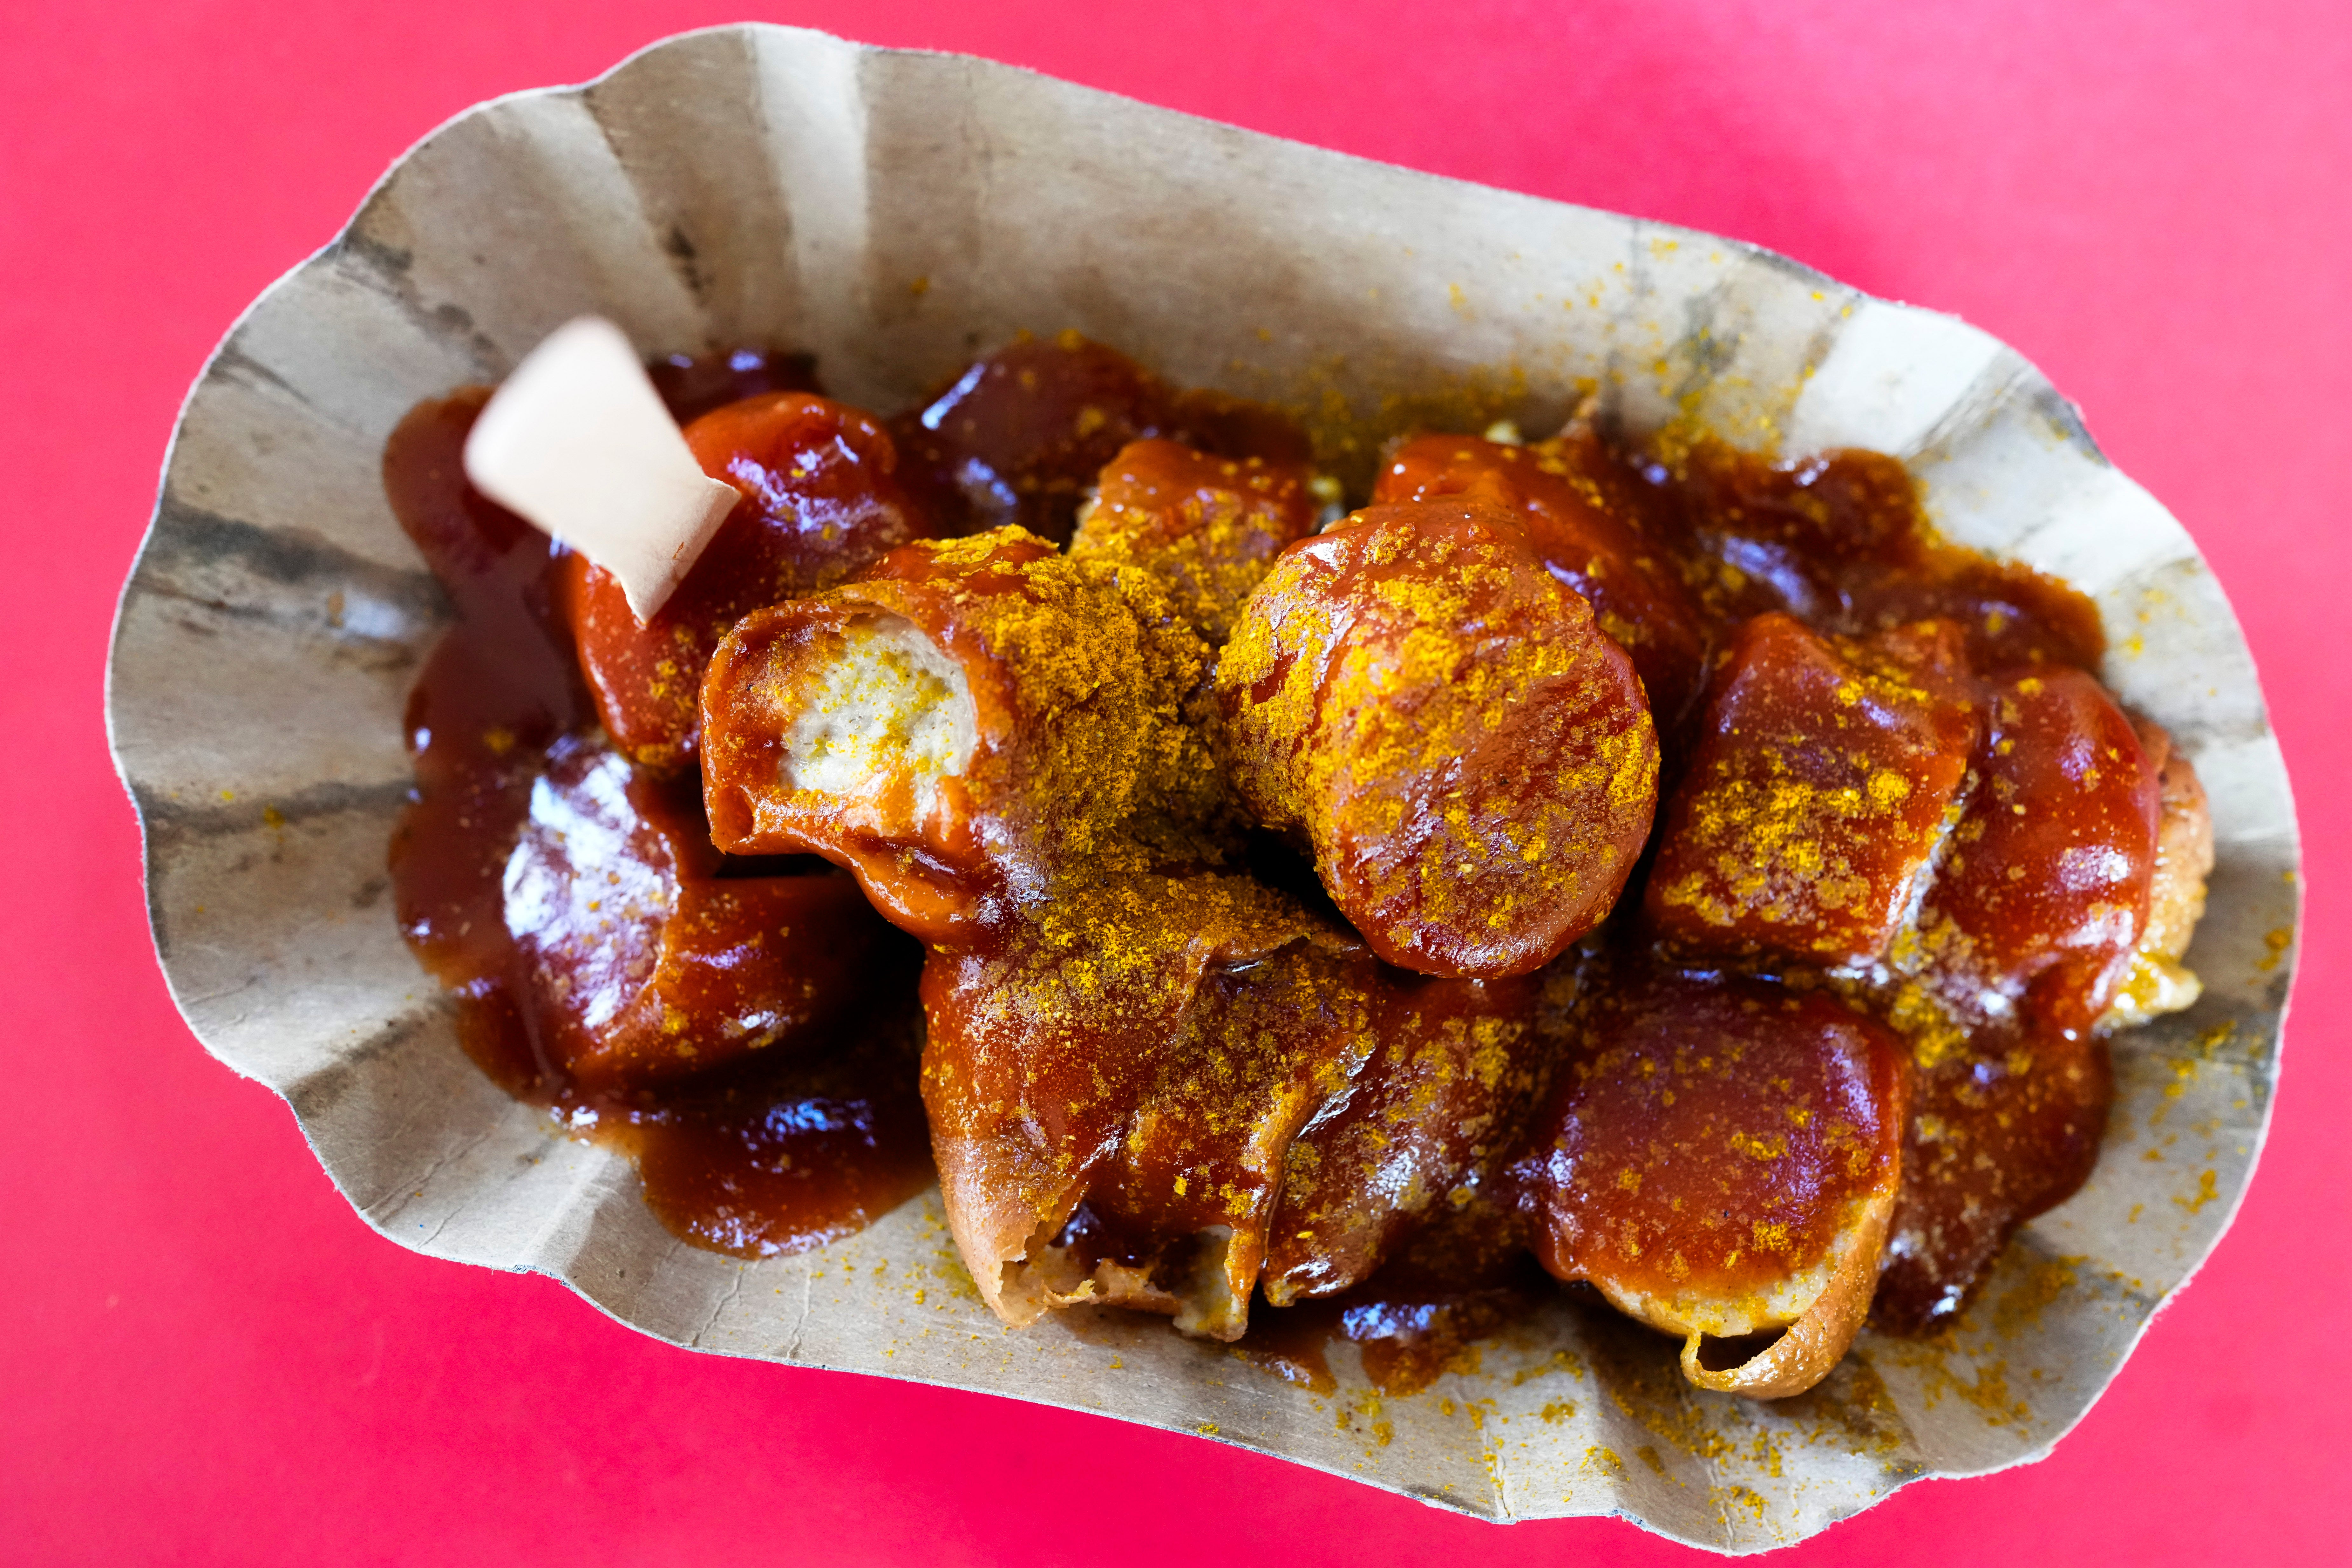 Currywurst, Germany’s sausage with curry sauce, served on a cardboard at Konnopke’s Imbiß